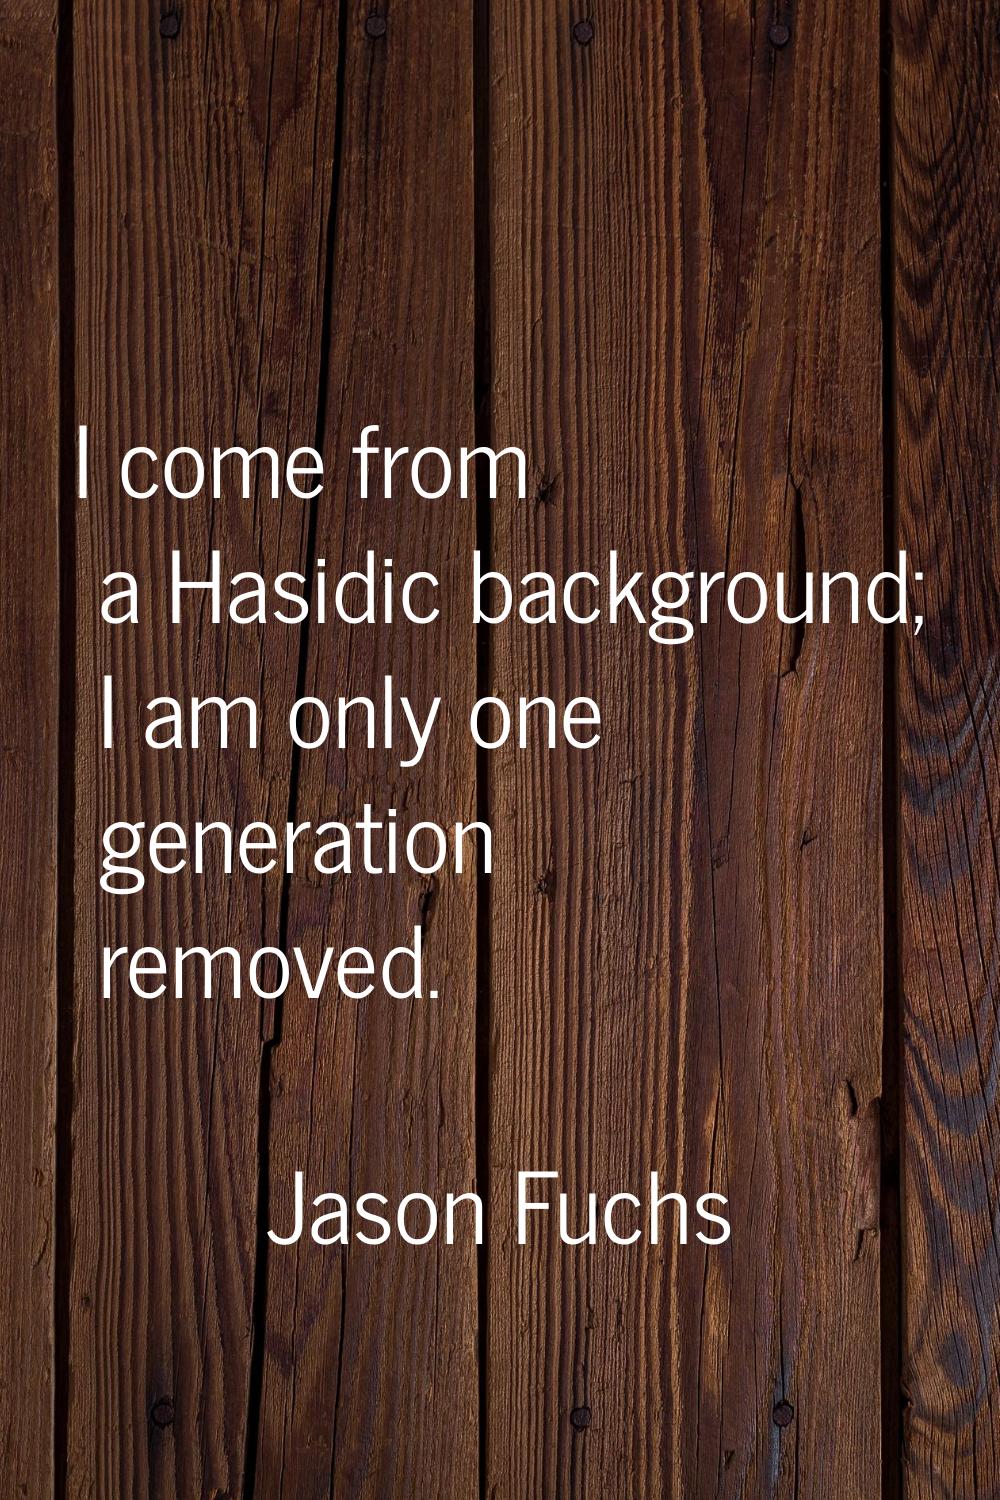 I come from a Hasidic background; I am only one generation removed.